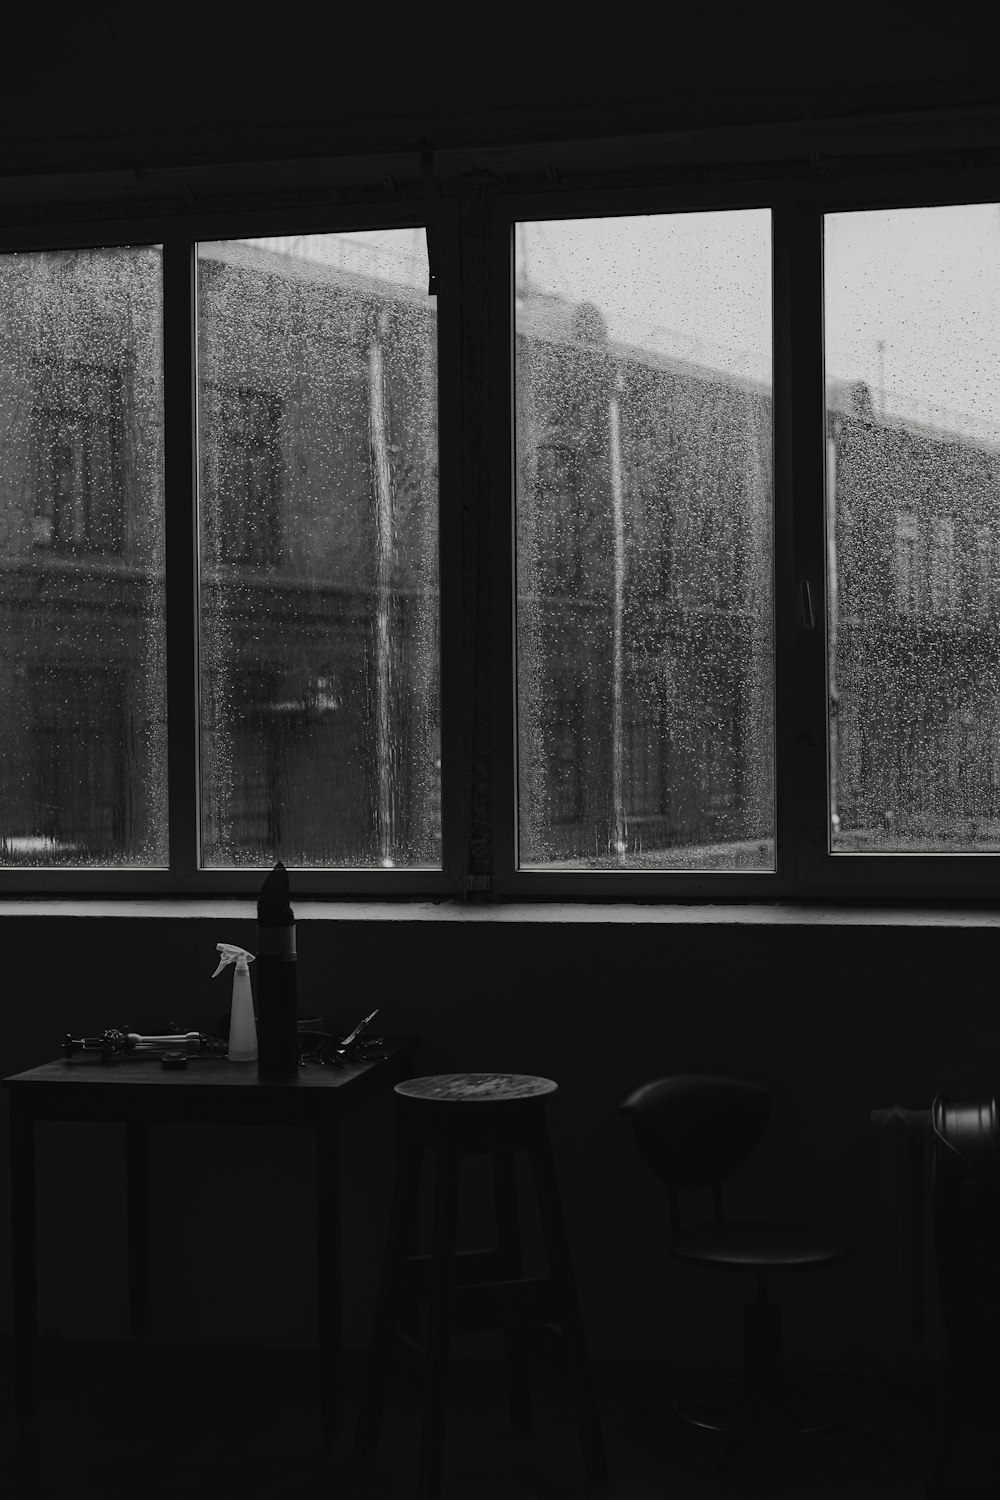 a black and white photo of a window with rain coming in